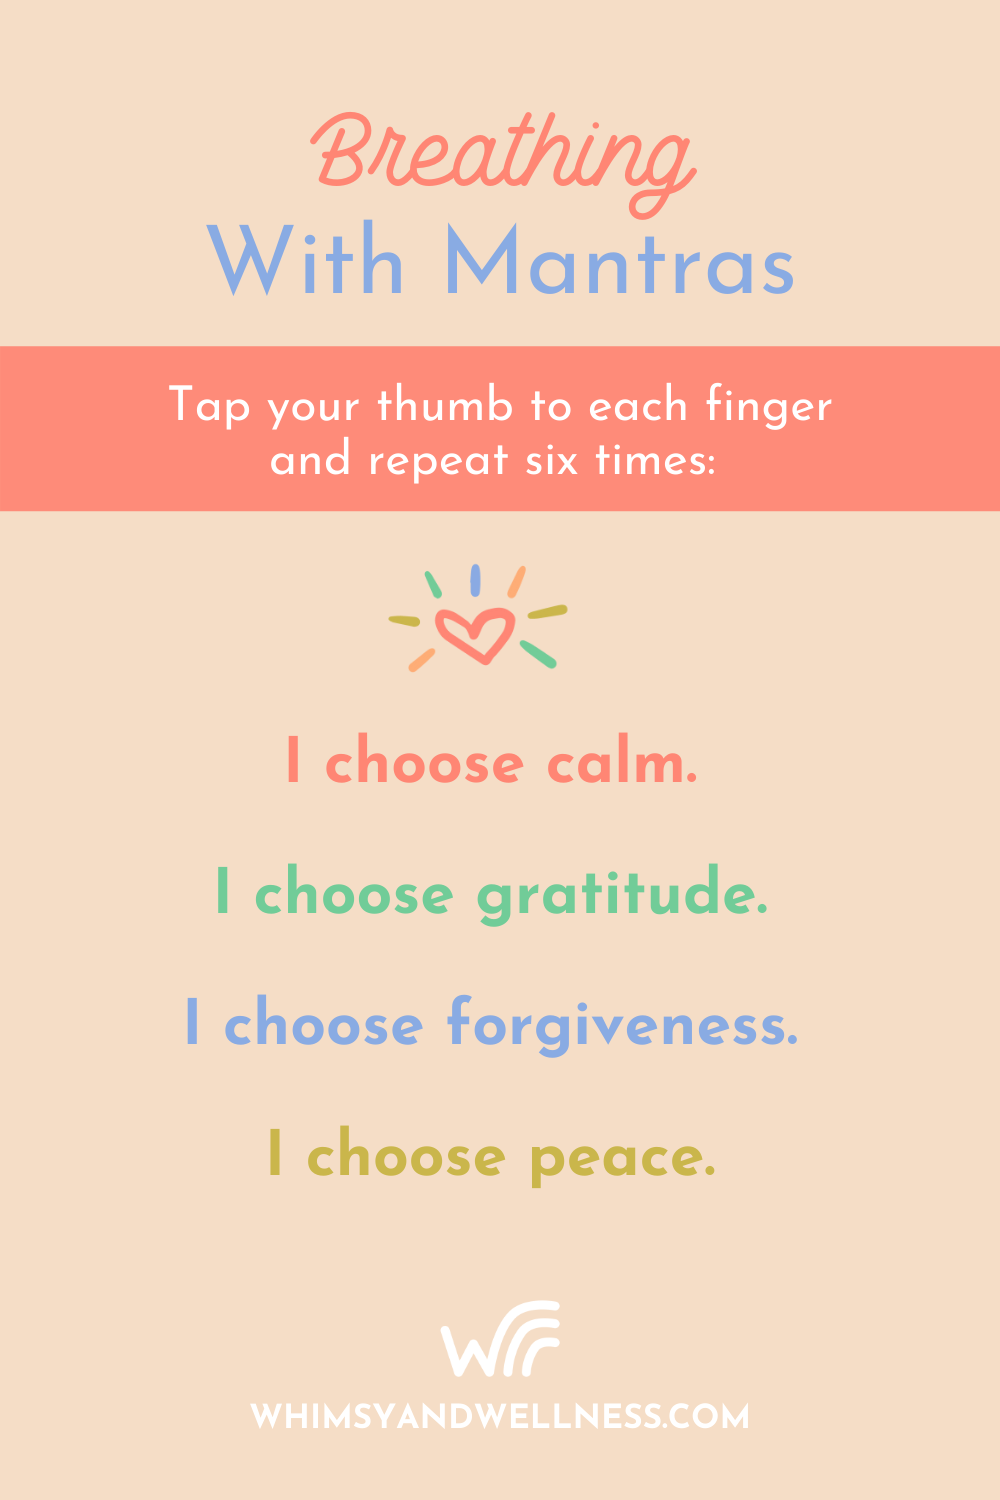 Breathing with Mantras